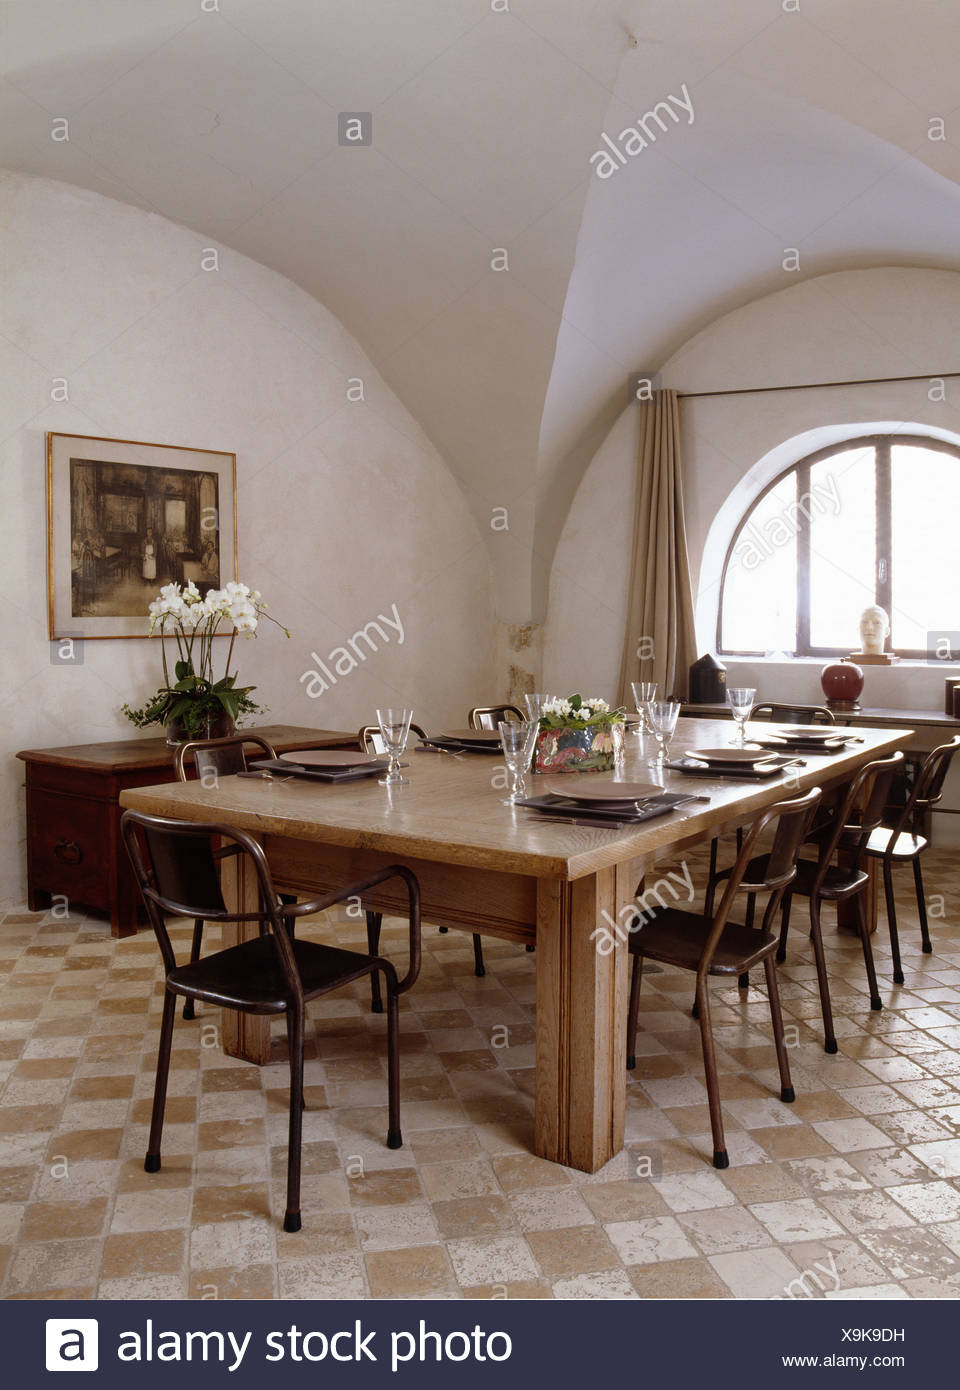 Black Metal Chairs At Large Wooden Table In French Country Dining